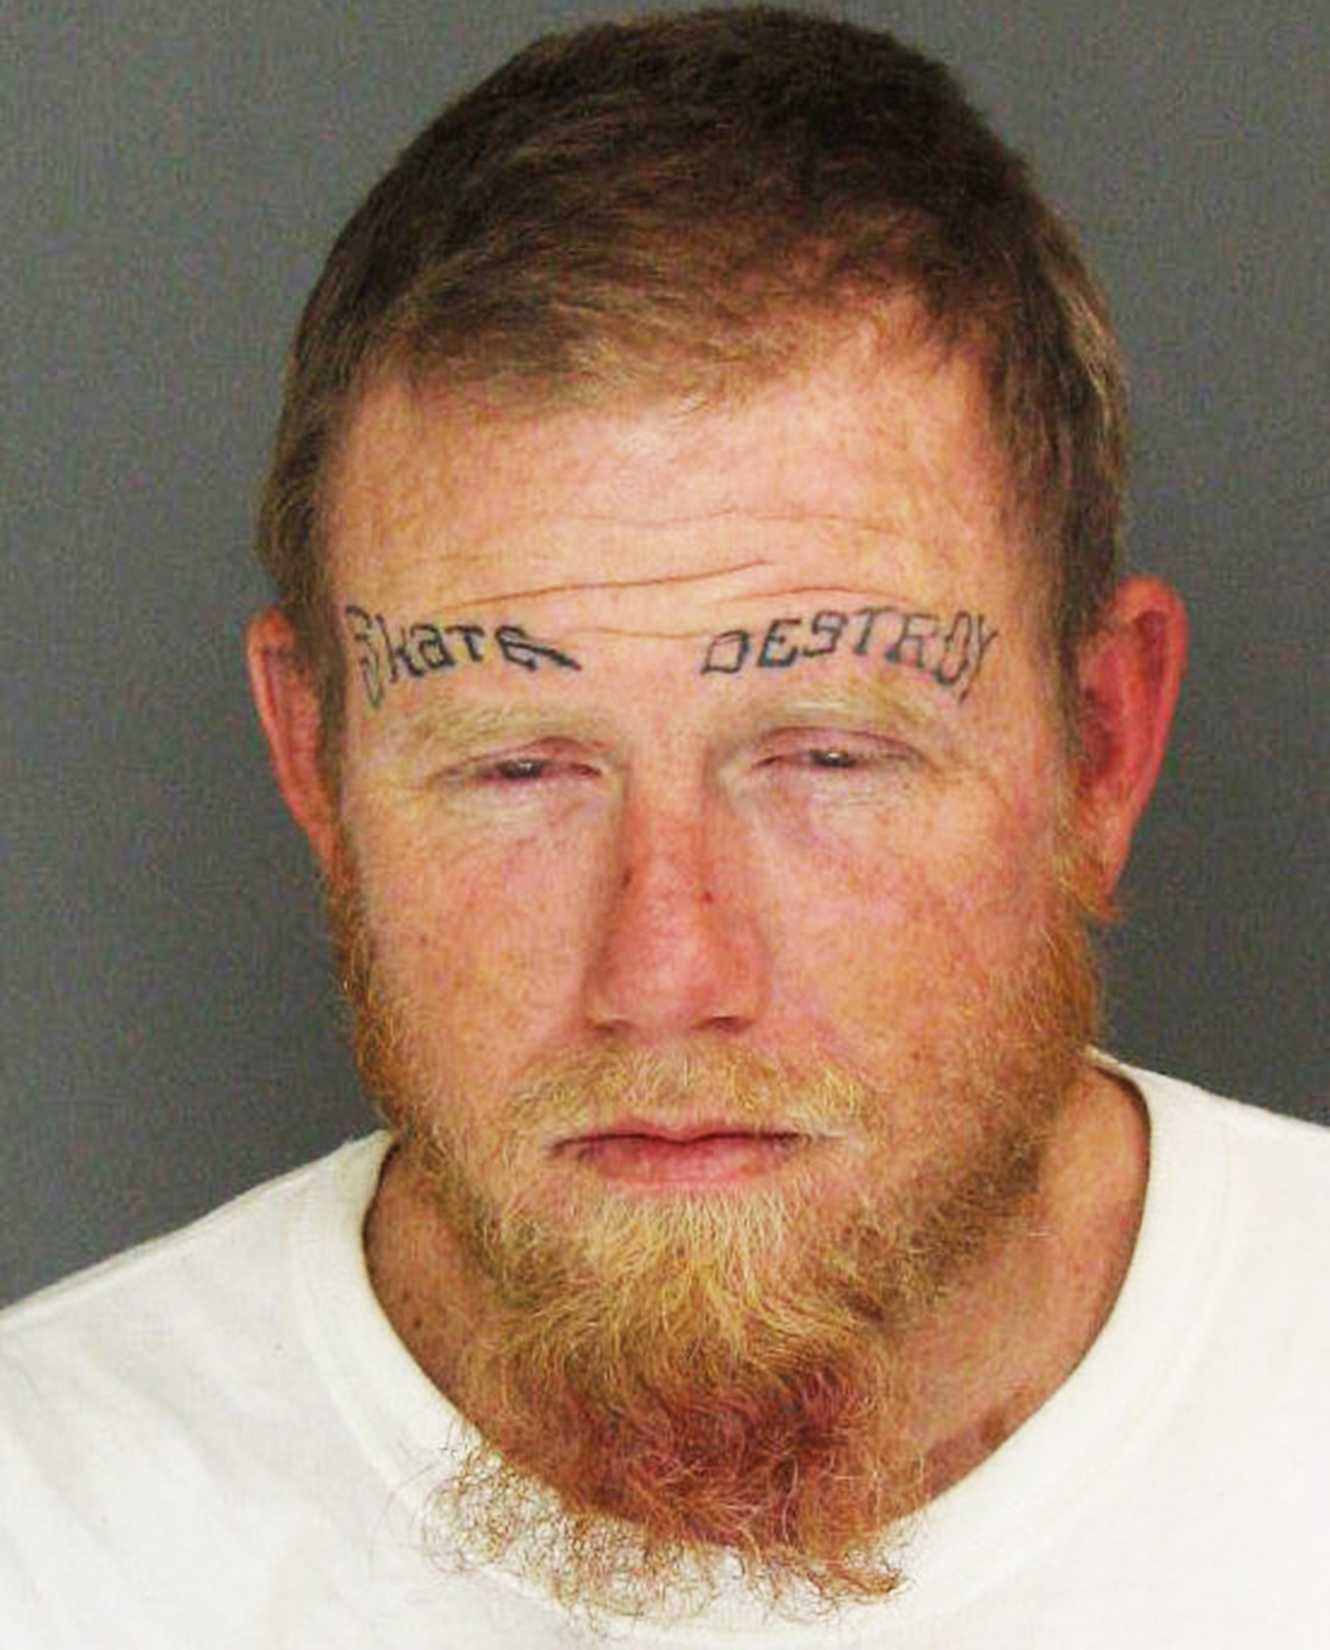 Santa Cruz inmate with skate and destroy face tattoos escapes